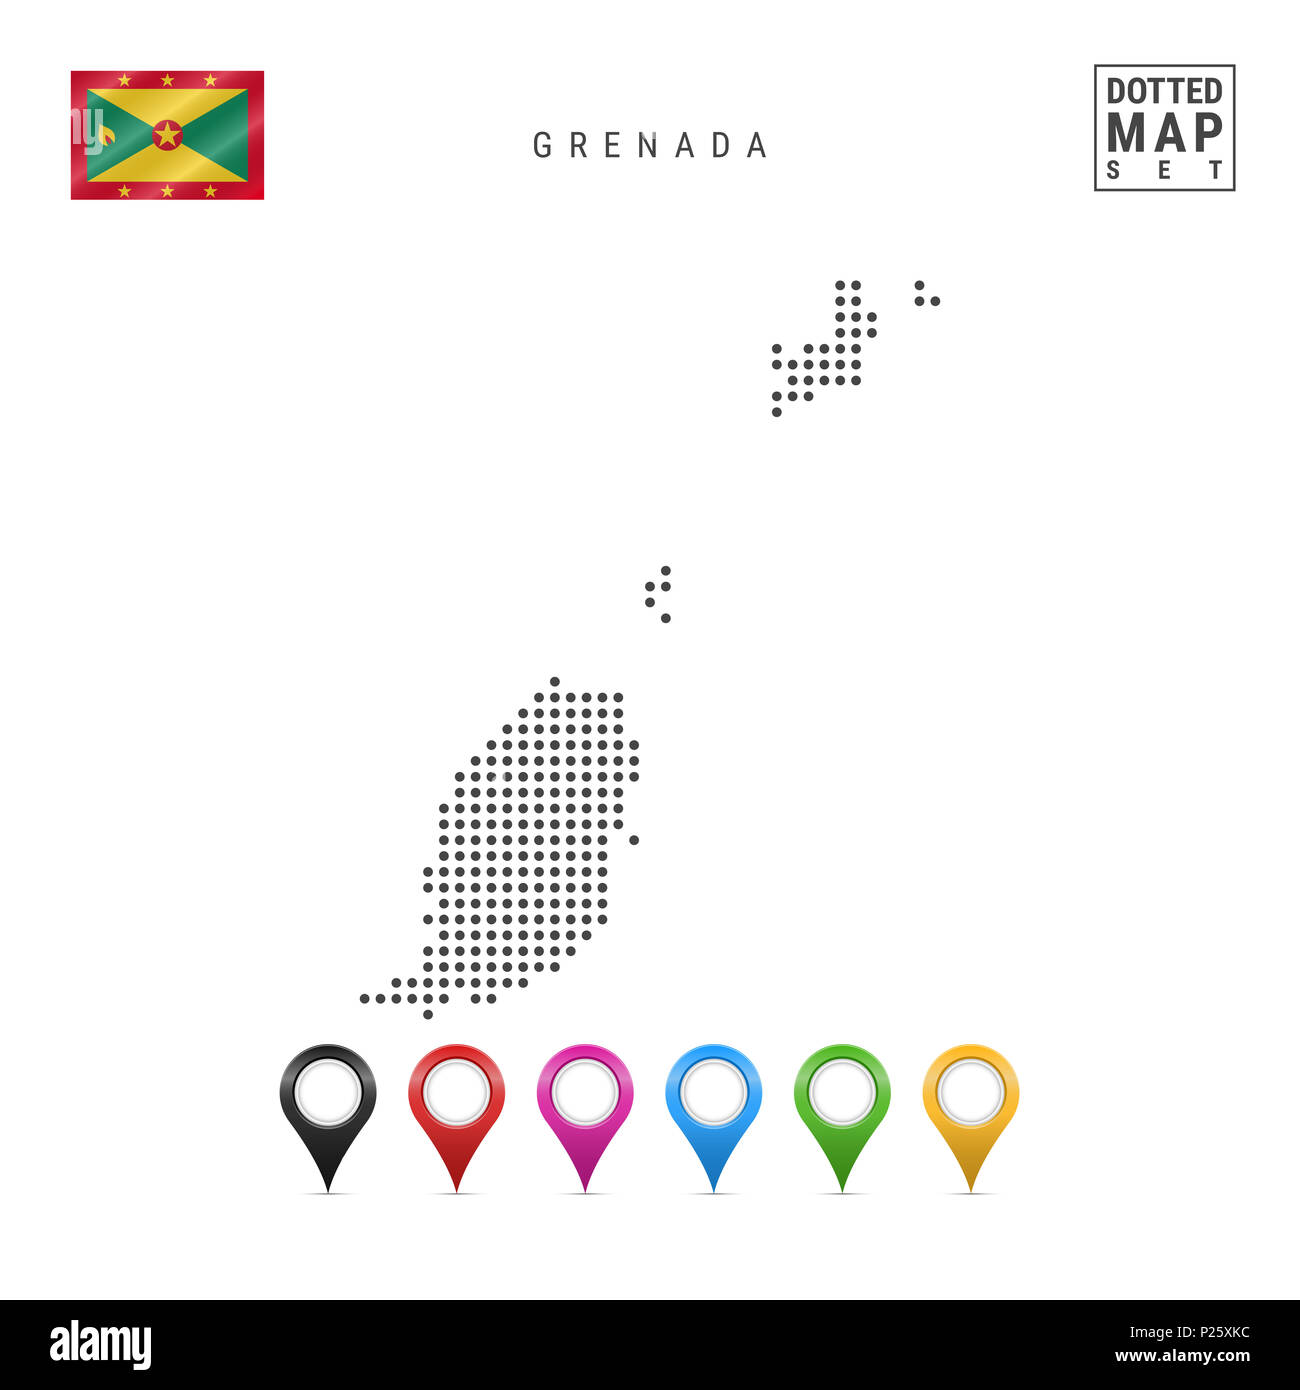 Dotted Map of Grenada. Simple Silhouette of Grenada. The National Flag of Grenada. Set of Multicolored Map Markers. Illustration Isolated on White Bac Stock Photo